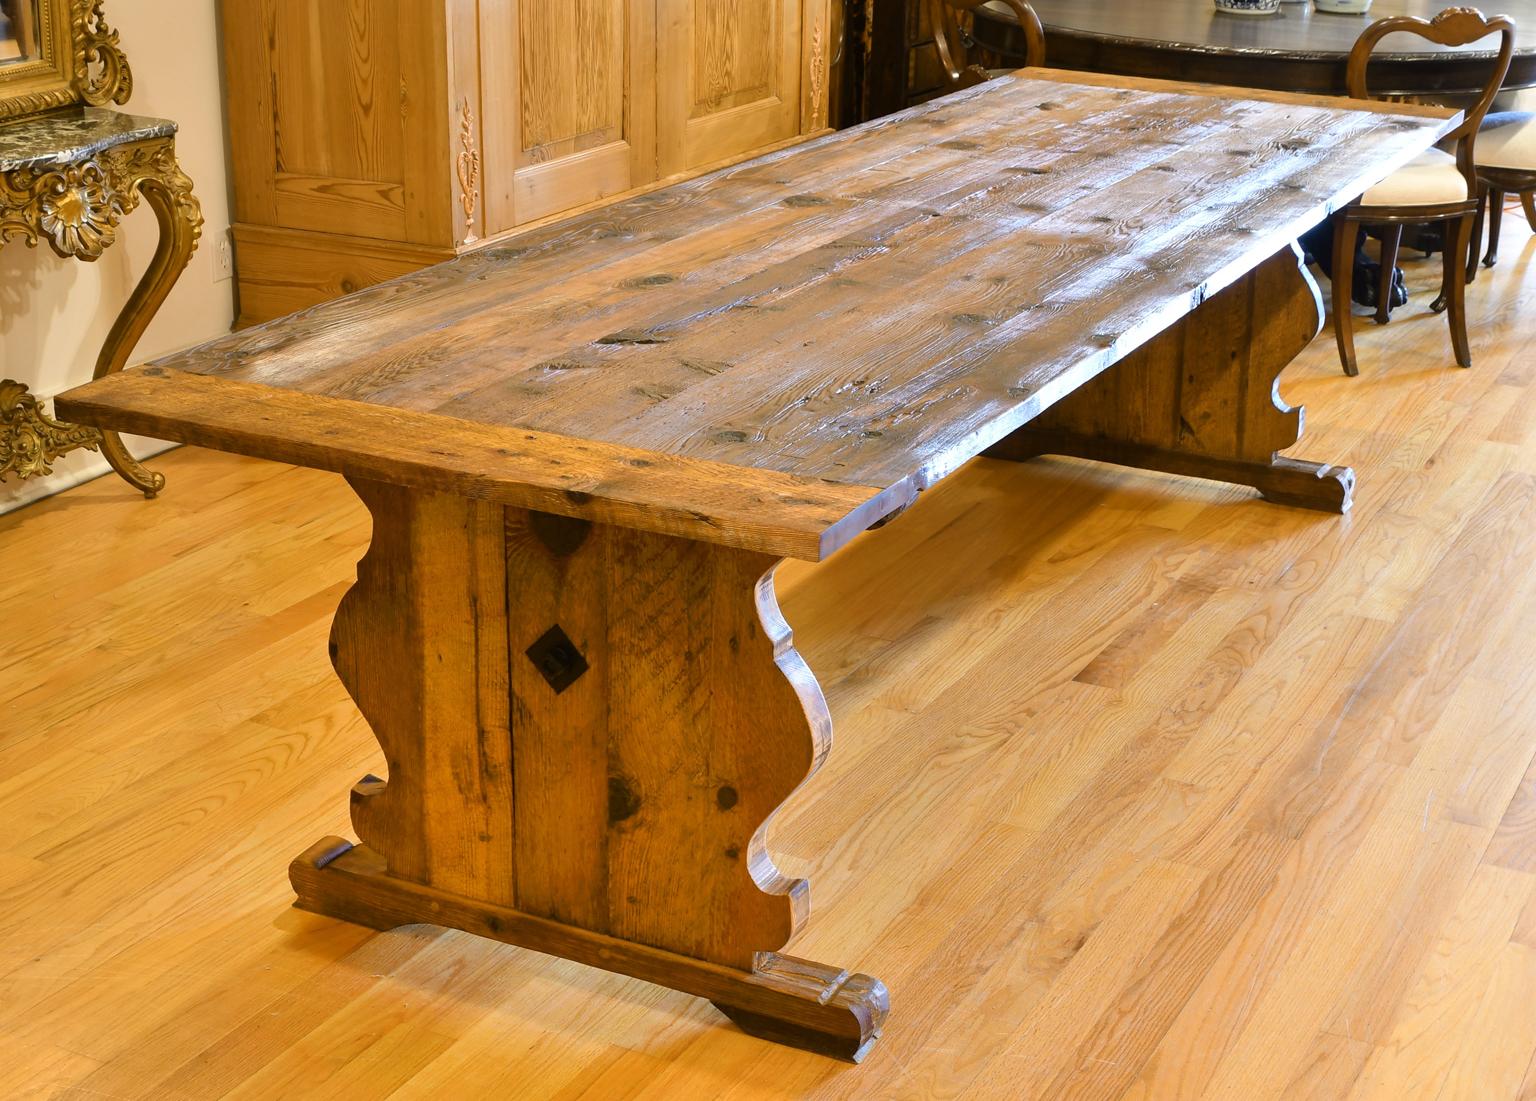 
Ready for immediate delivery this 10' Swedish Trestle Base Farm Table was inspired from an original Gustavian table in our inventory dating from the early 1800's
The wood top is constructed from 100 year old Douglas Fir planks sourced from Northern